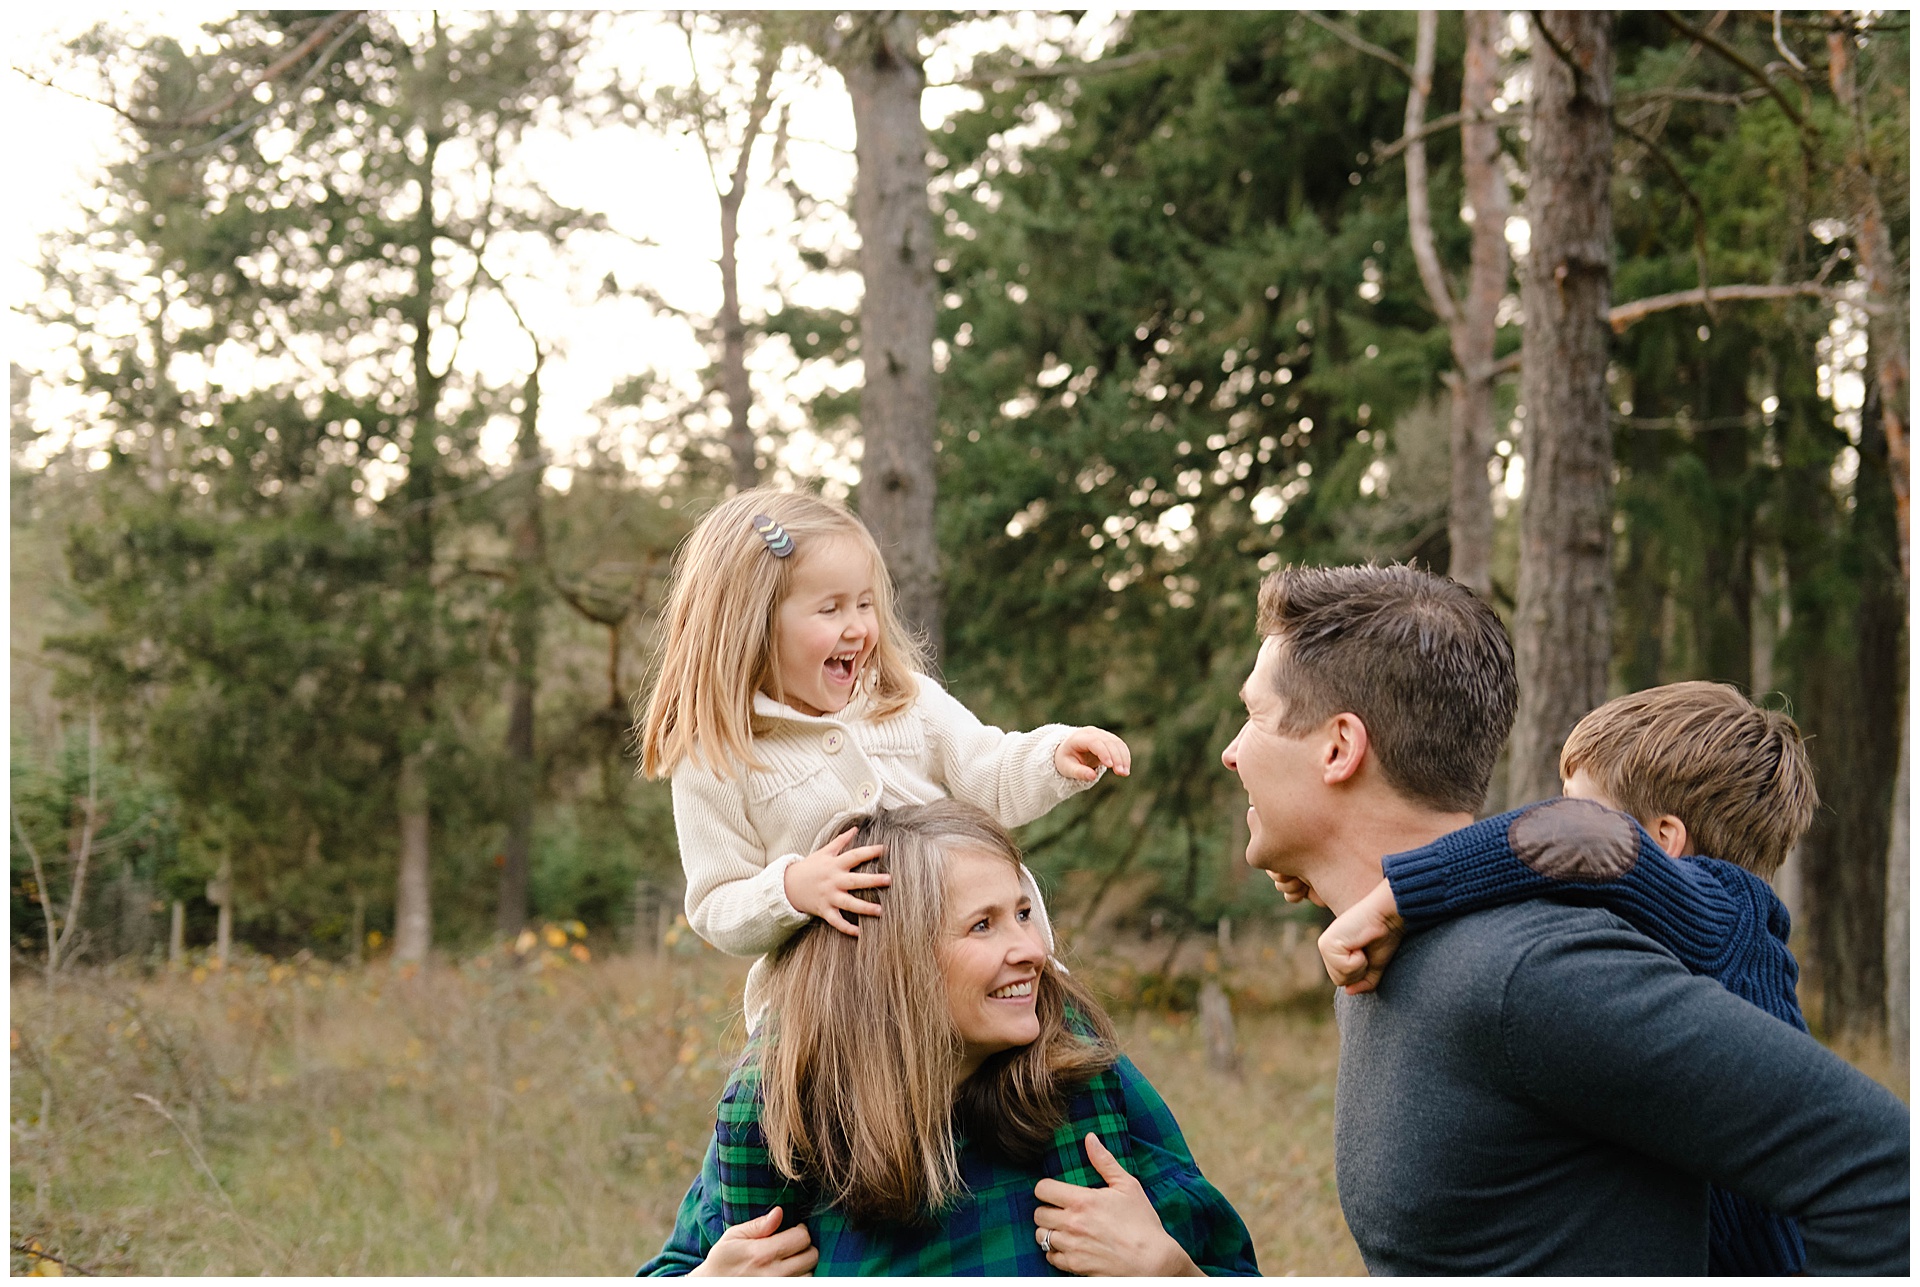 Portland family portraits by Alison Smith of Thistledown photography